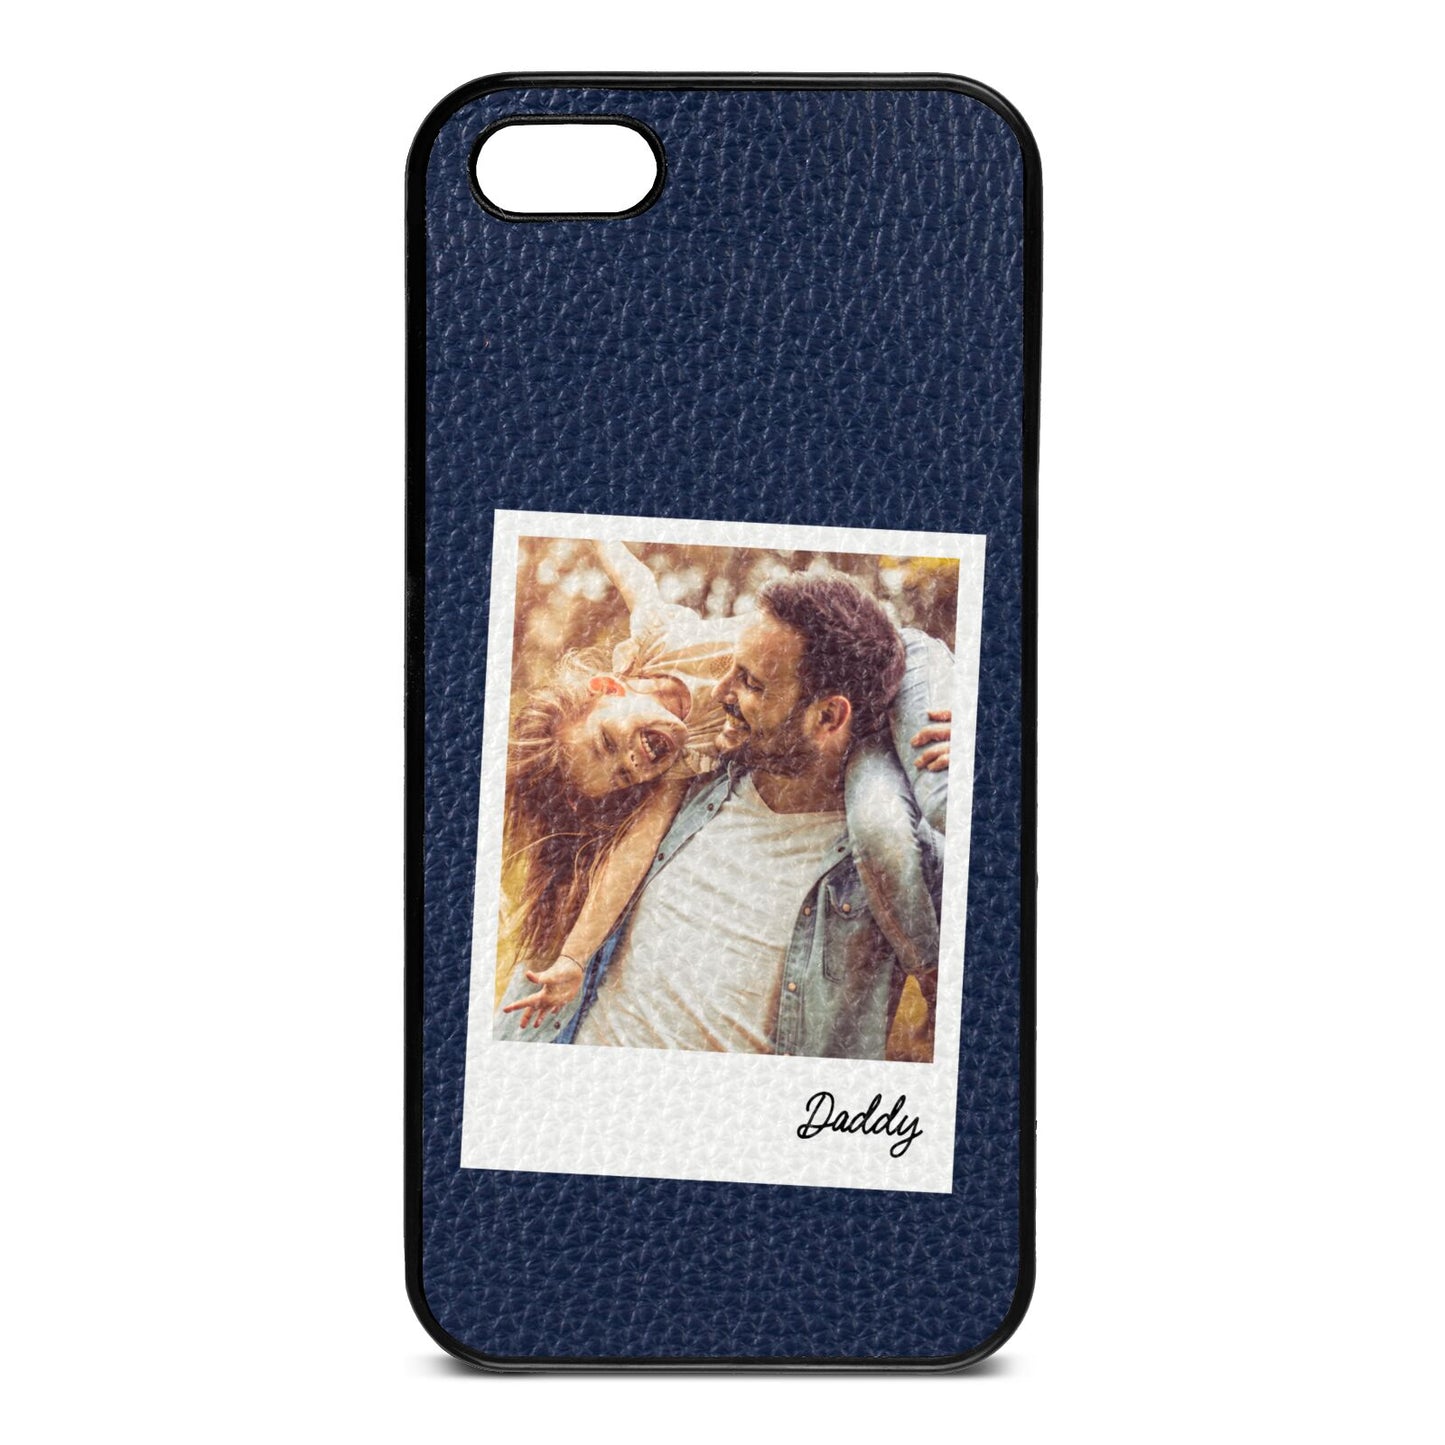 Fathers Day Photo Navy Blue Pebble Leather iPhone 5 Case